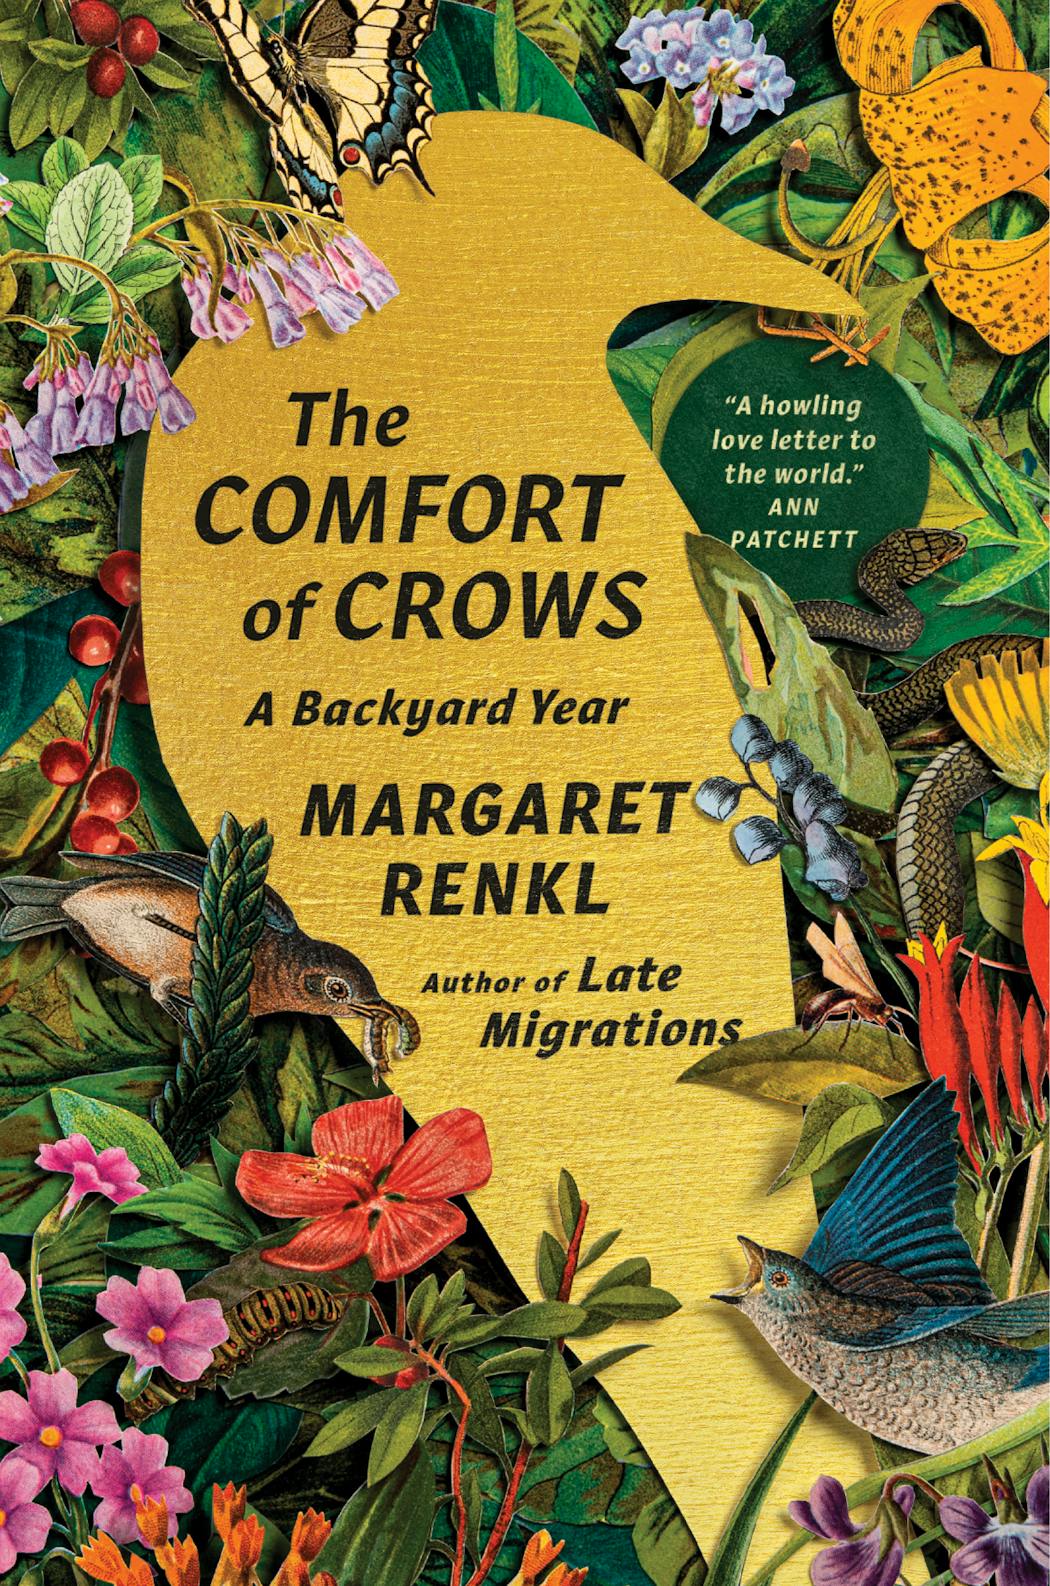 Margaret Renkl’s latest book of essays tracks a year of backyard nature.